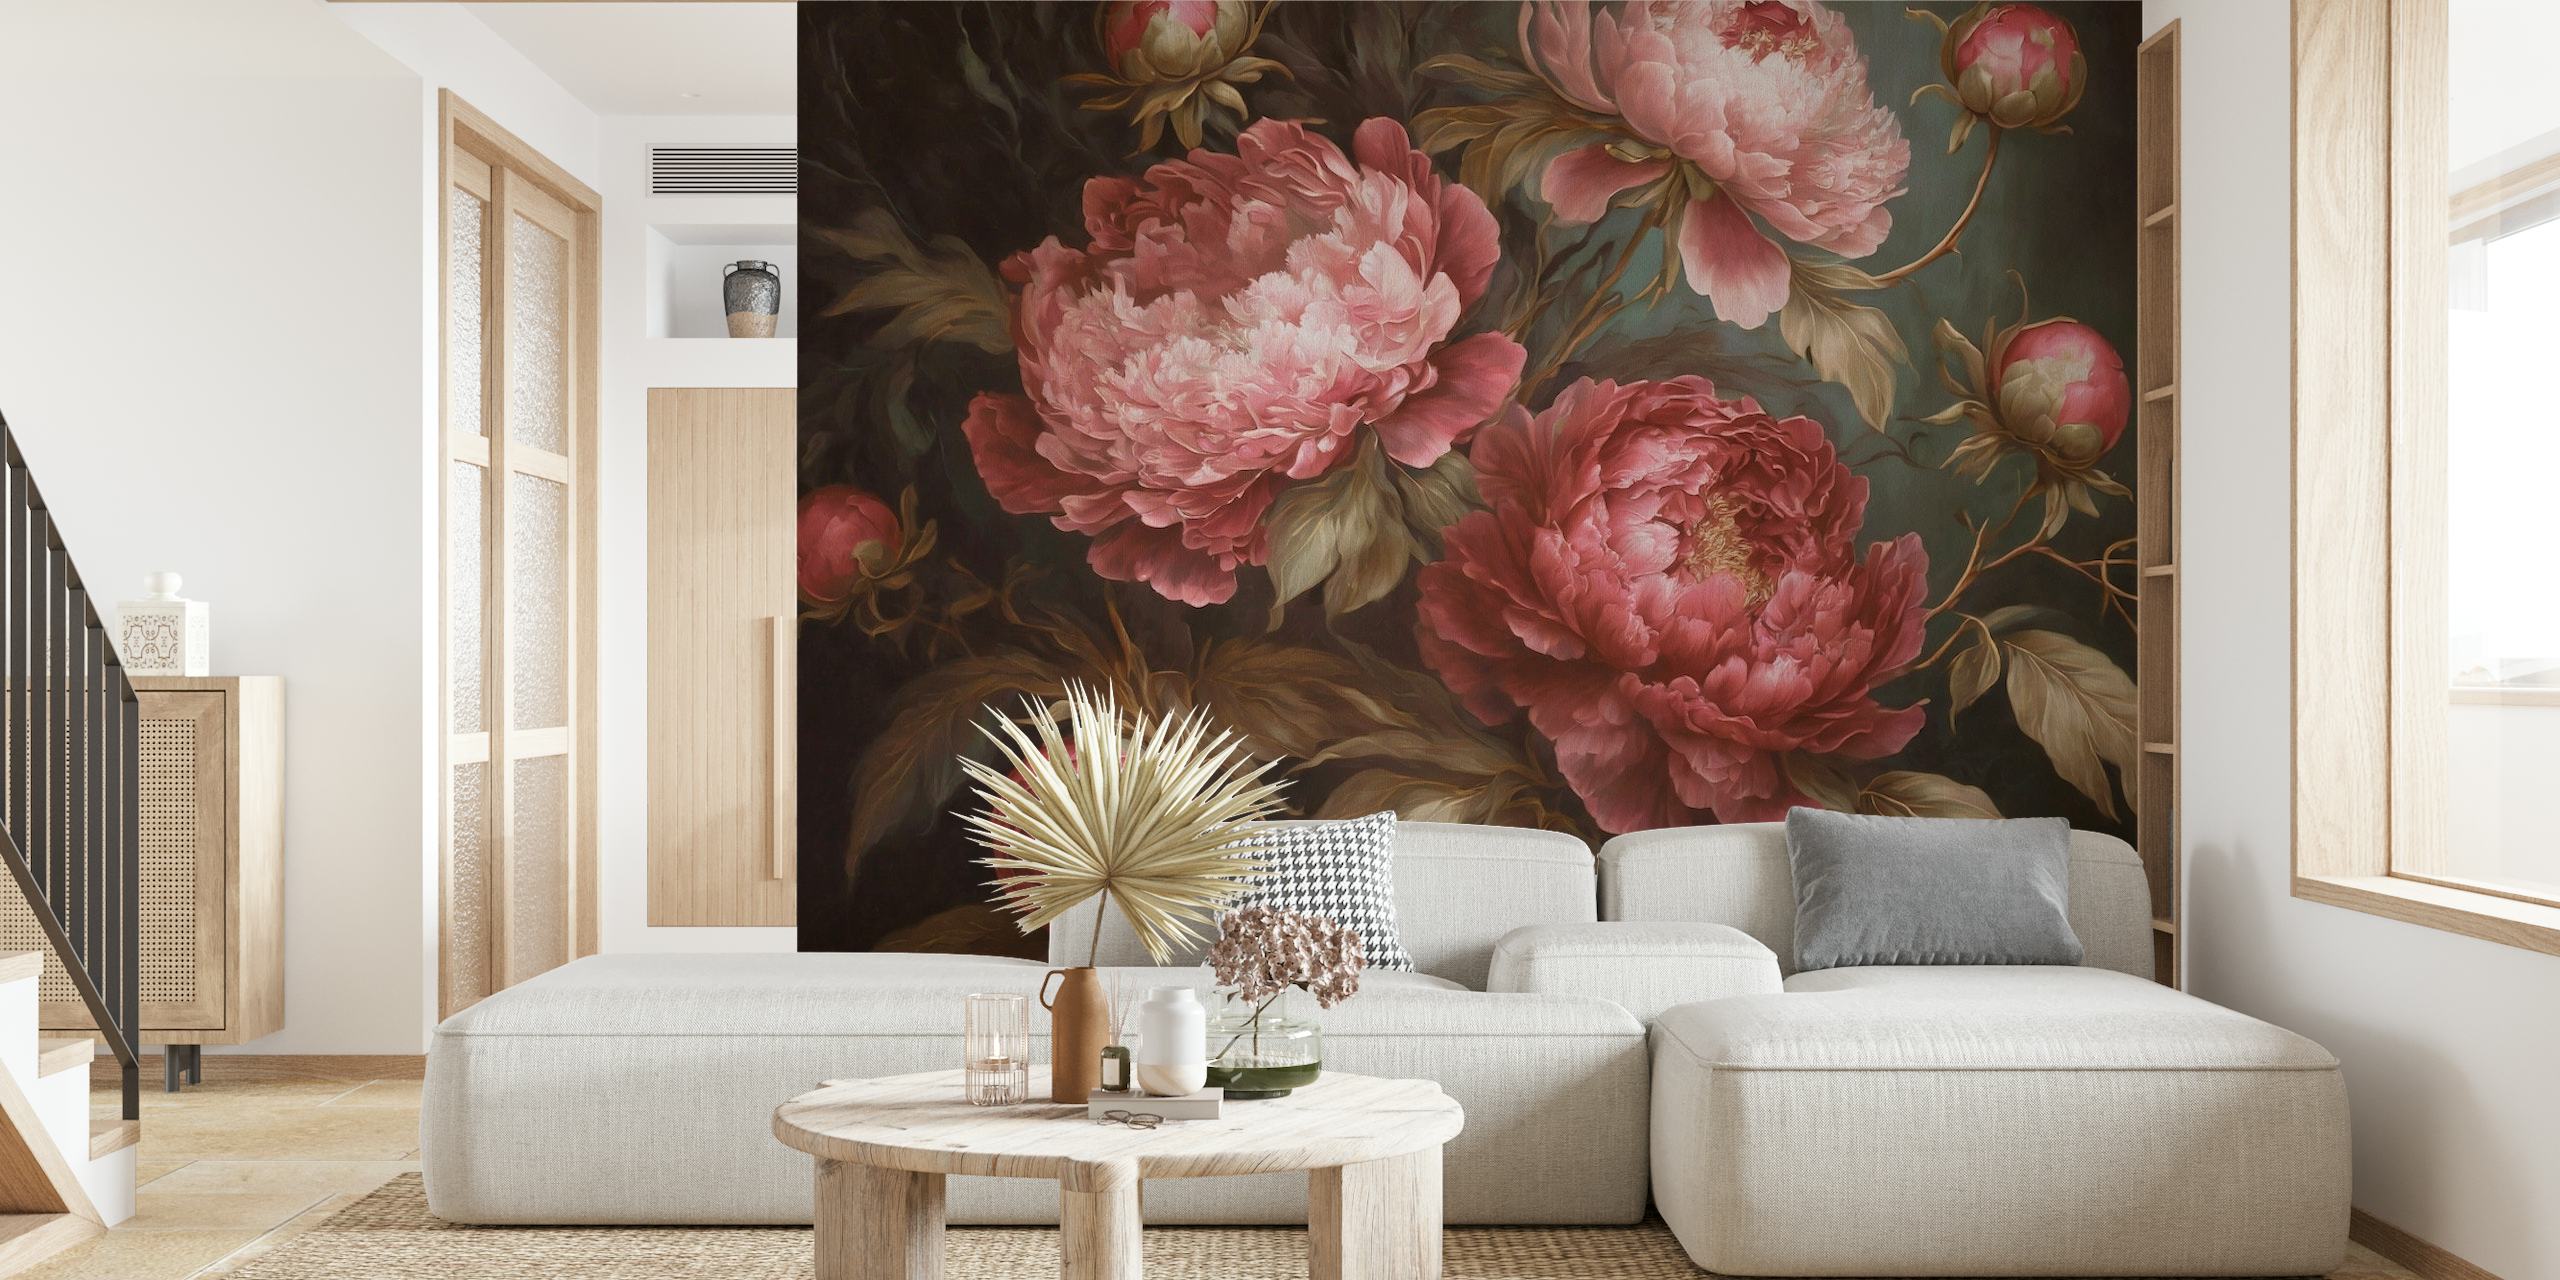 Wall mural featuring vintage-style red peonies with lush foliage on a dark background